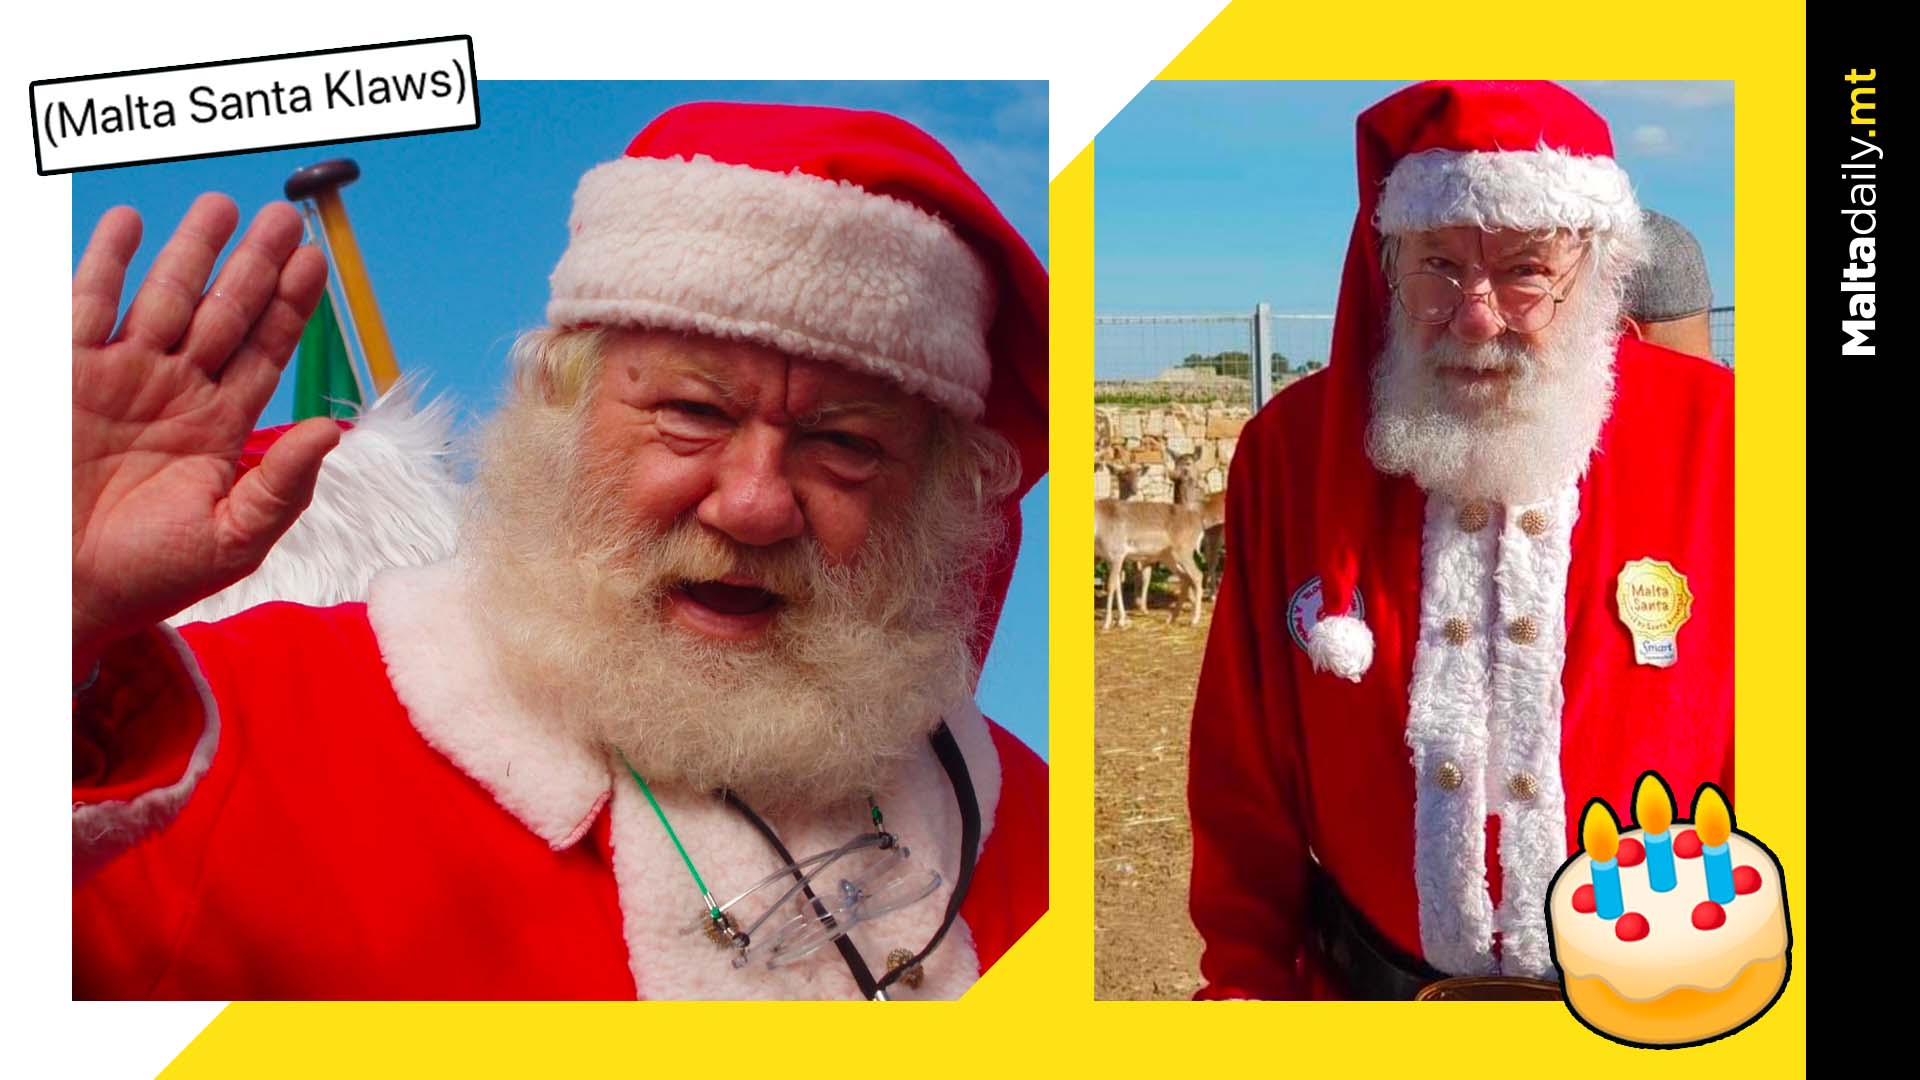 Malta's very own Santa Claus turns 80 years old